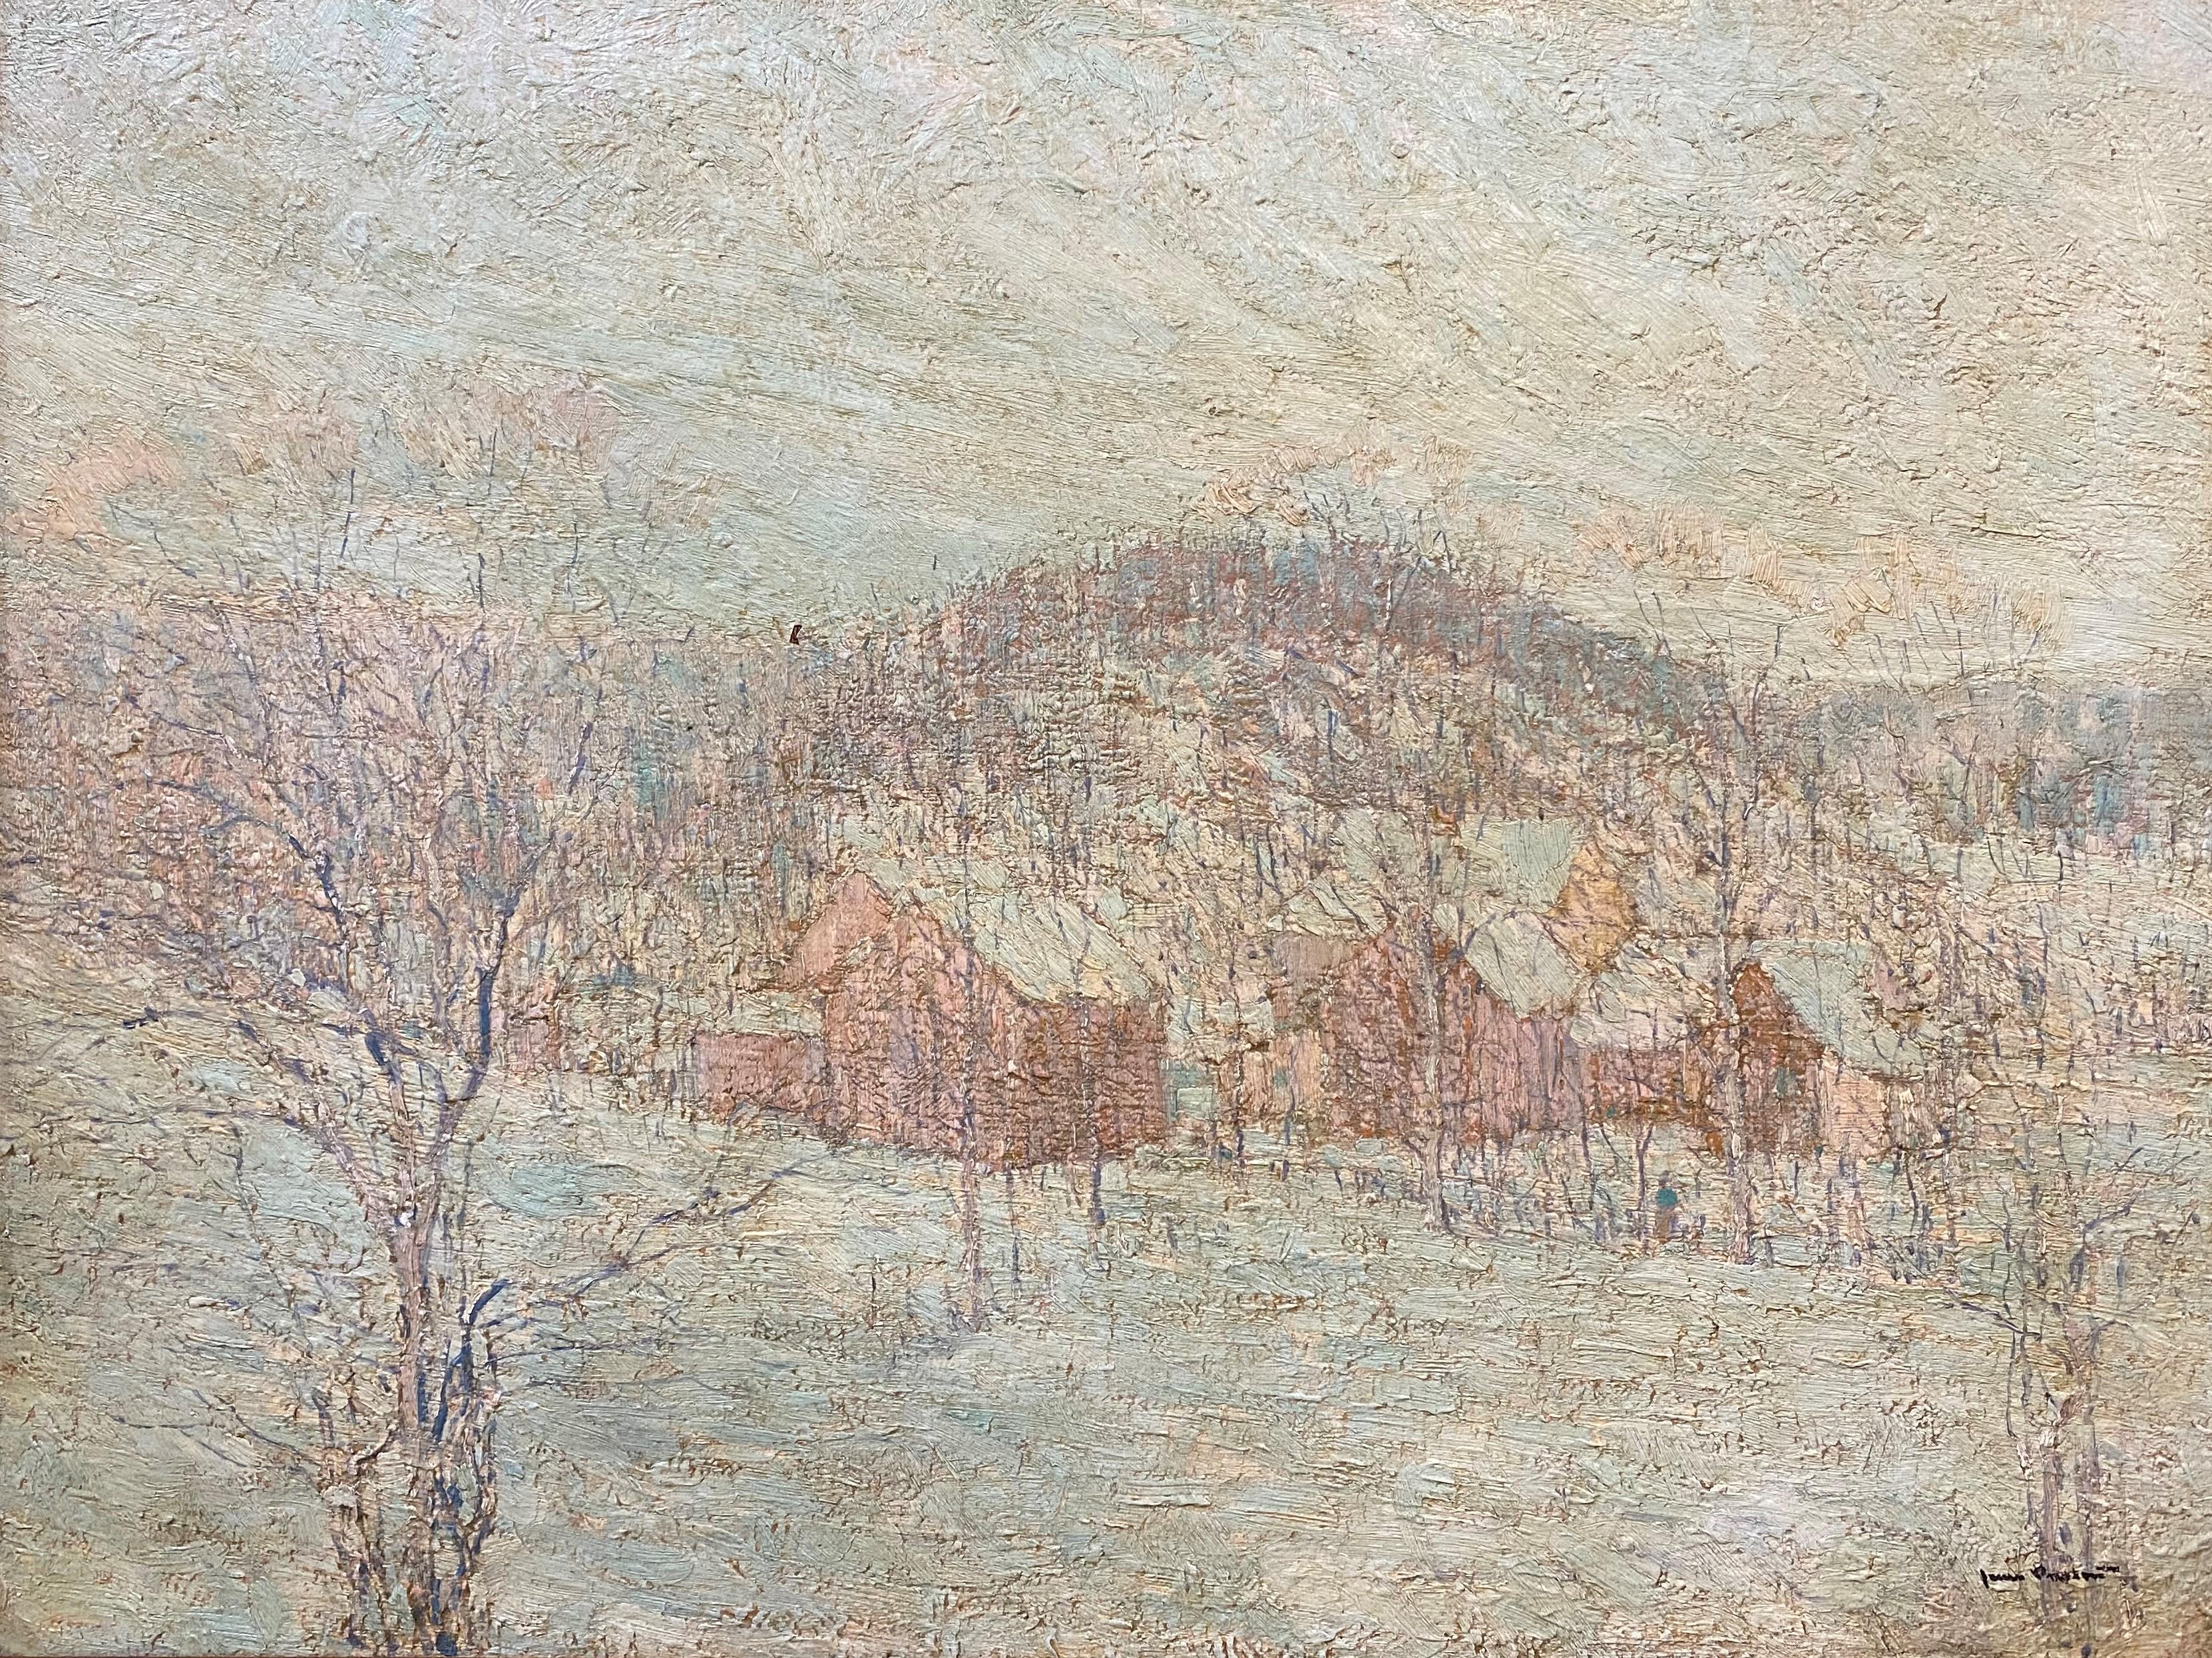 Winter Landscape with Houses - Painting by James Preston